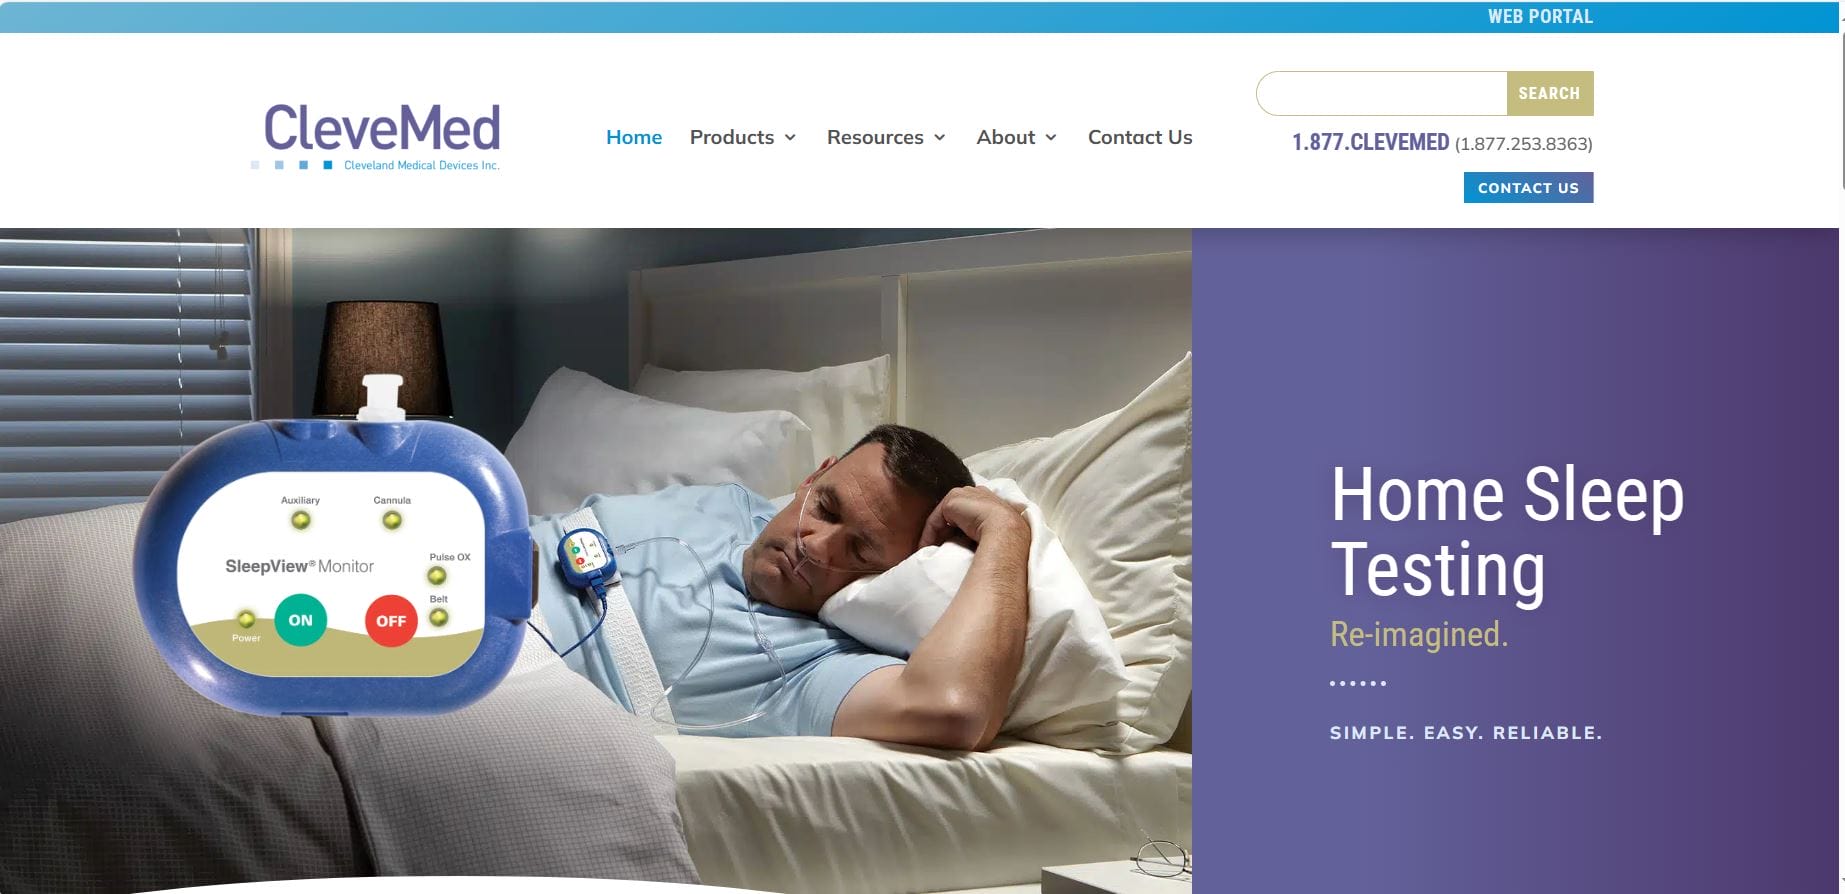 A man sleeping with a sleep monitoring device next to him, on a webpage for Clevemed's home sleep testing services featuring the SleepView guide.